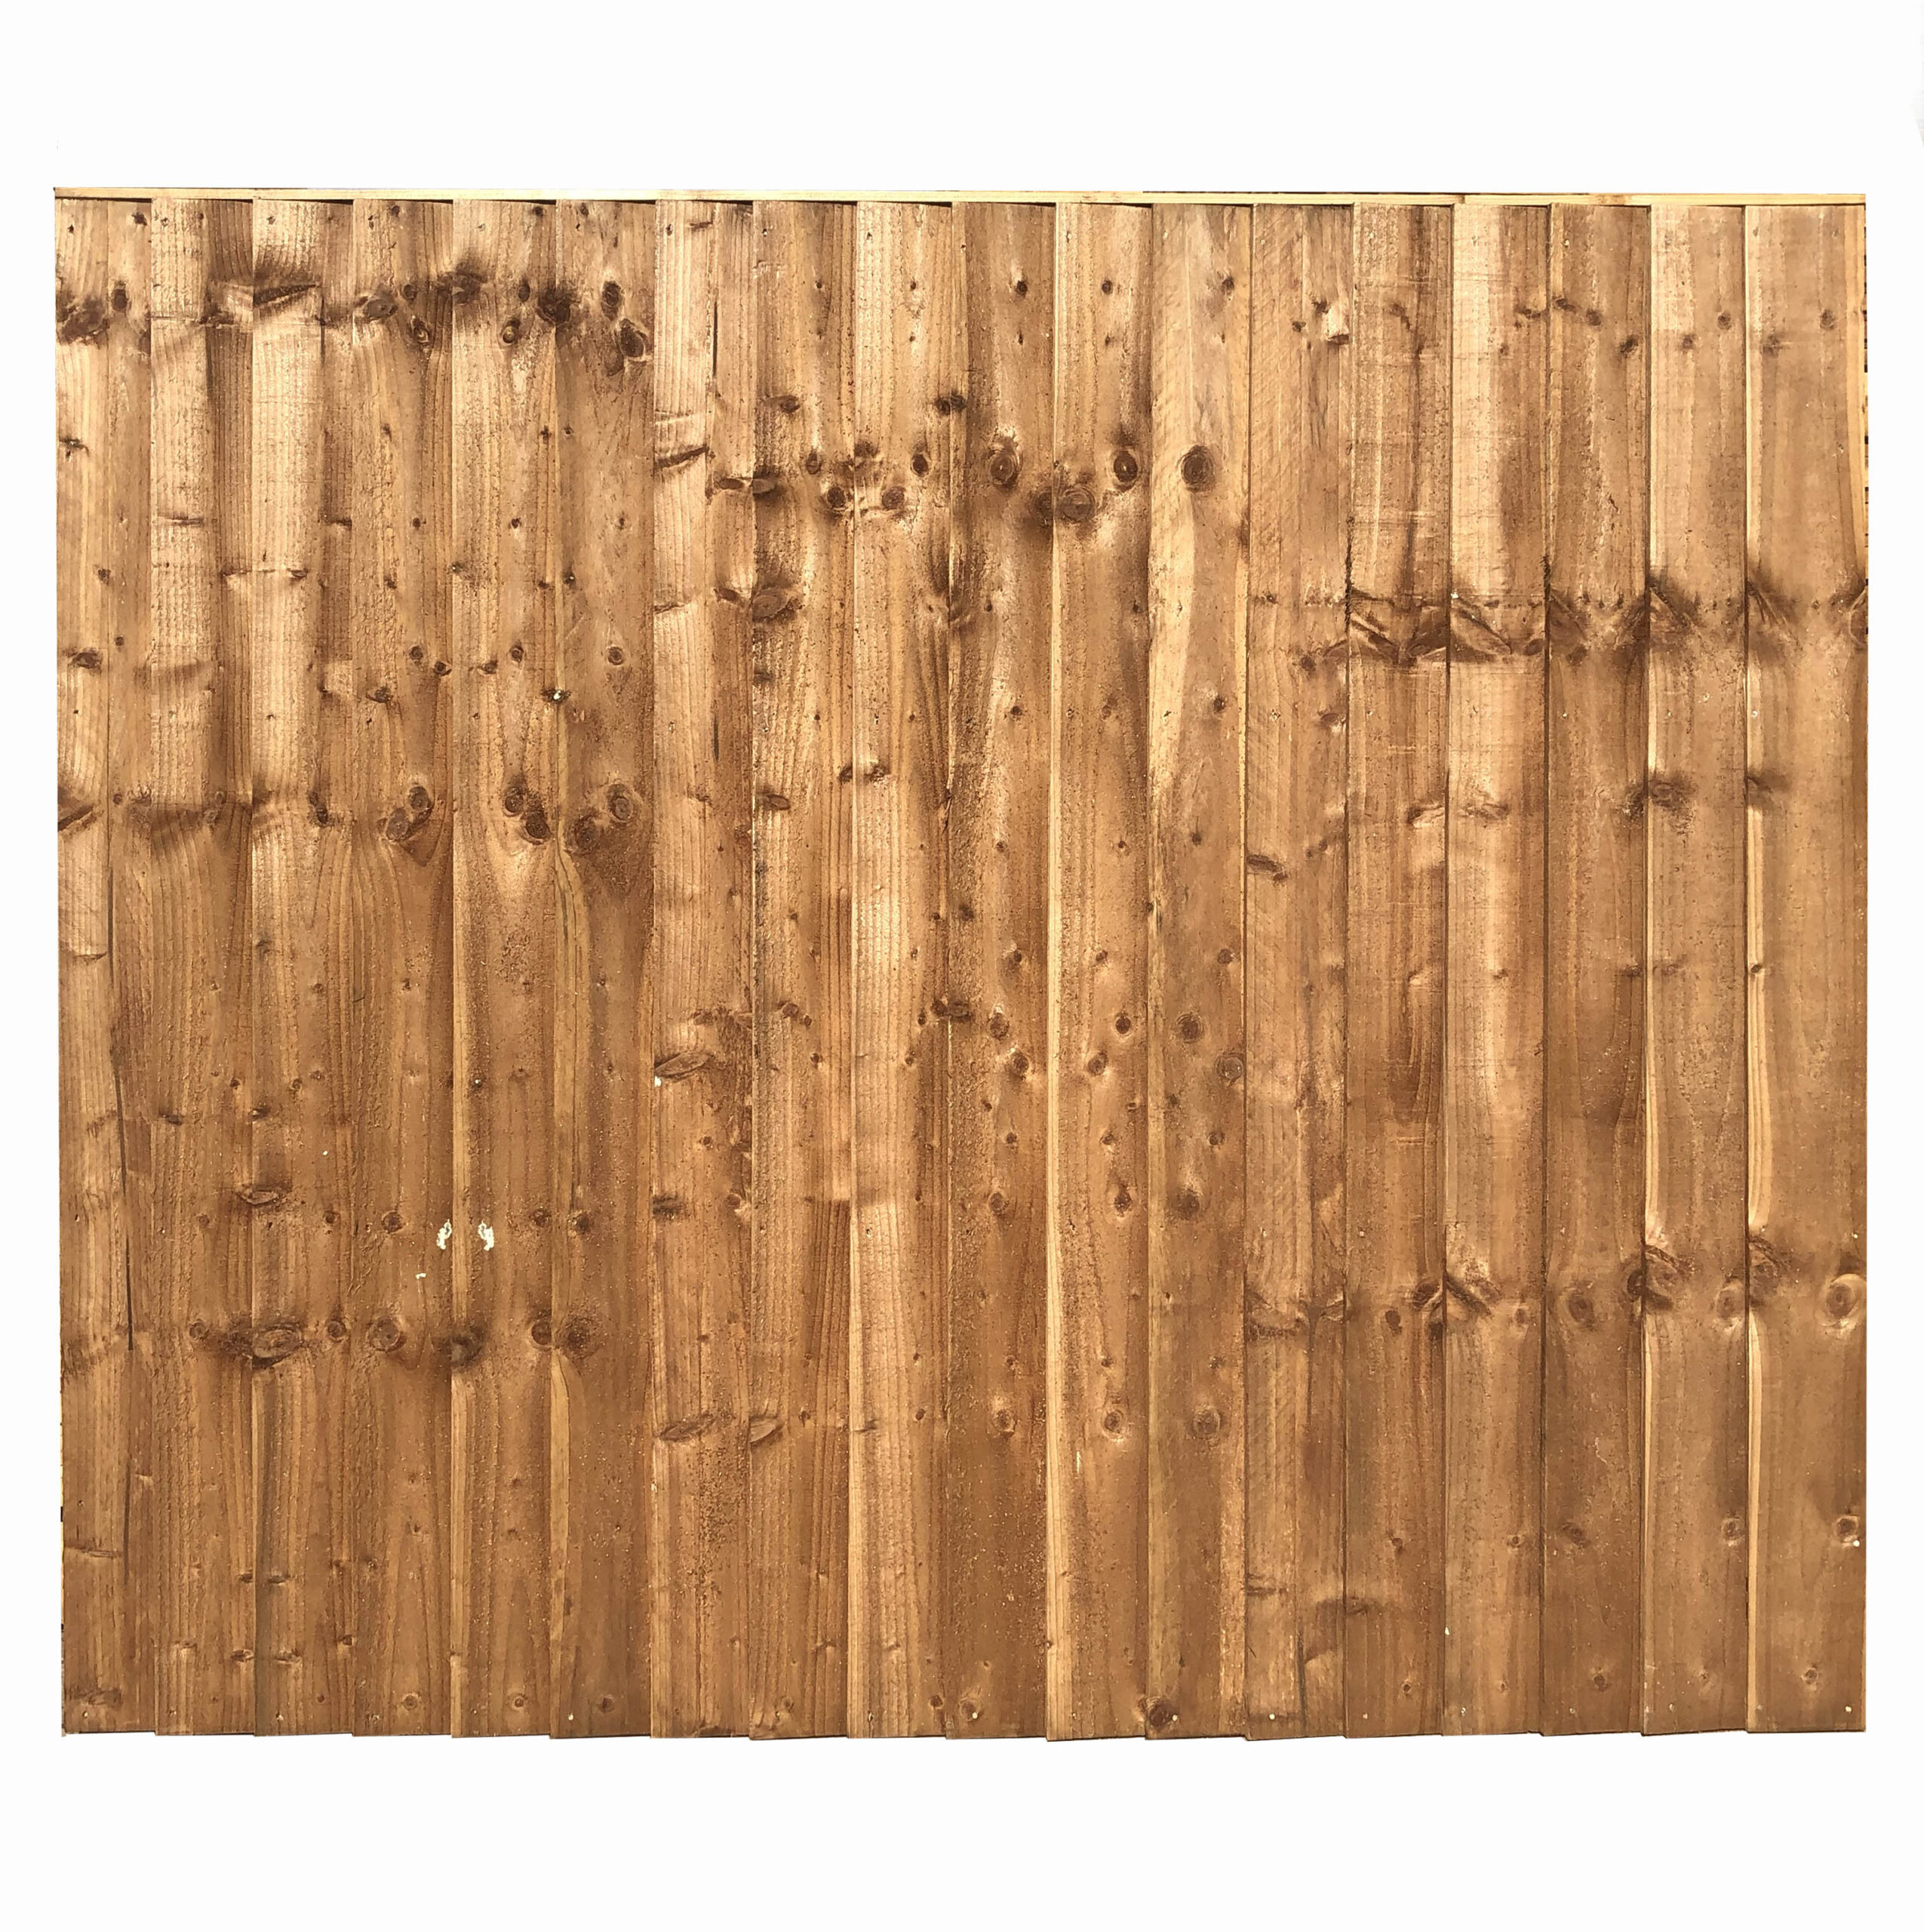 Full Framed Feather Edge Fence Panel Tanalised Brown